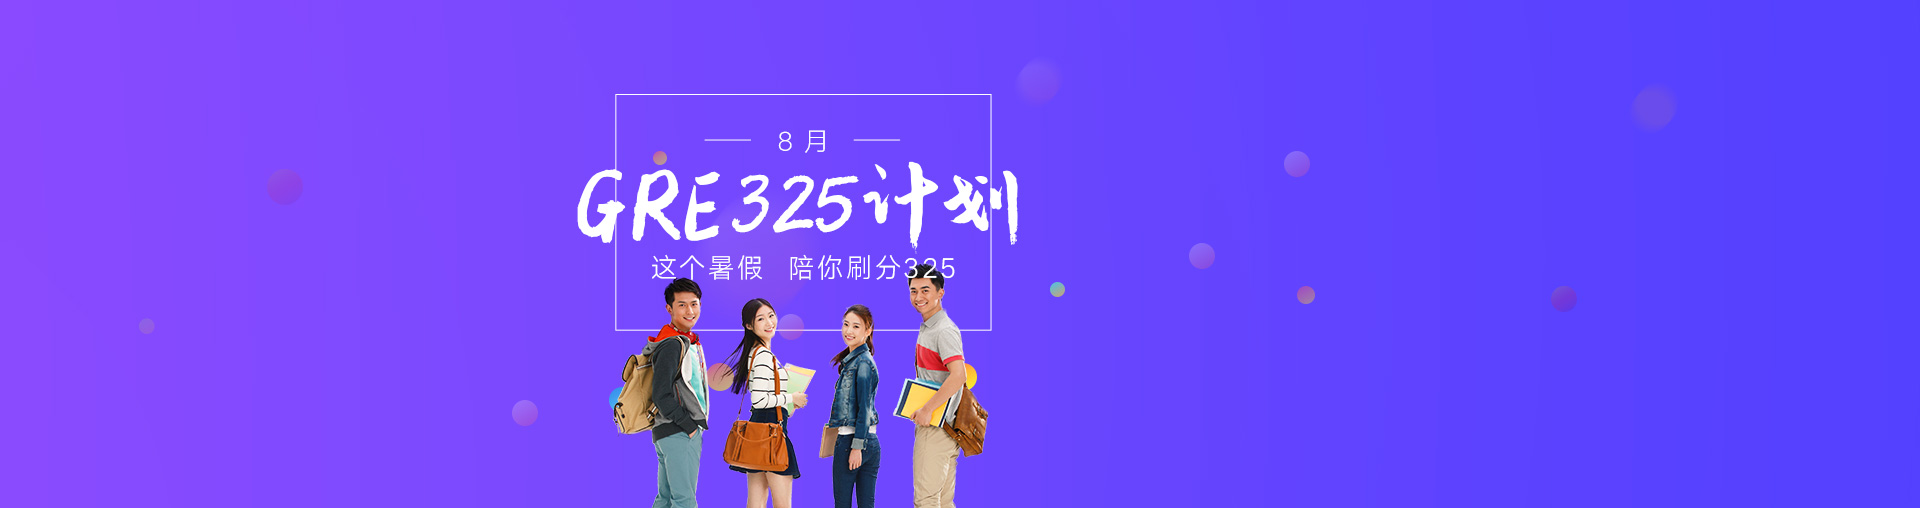 GRE8月325计划